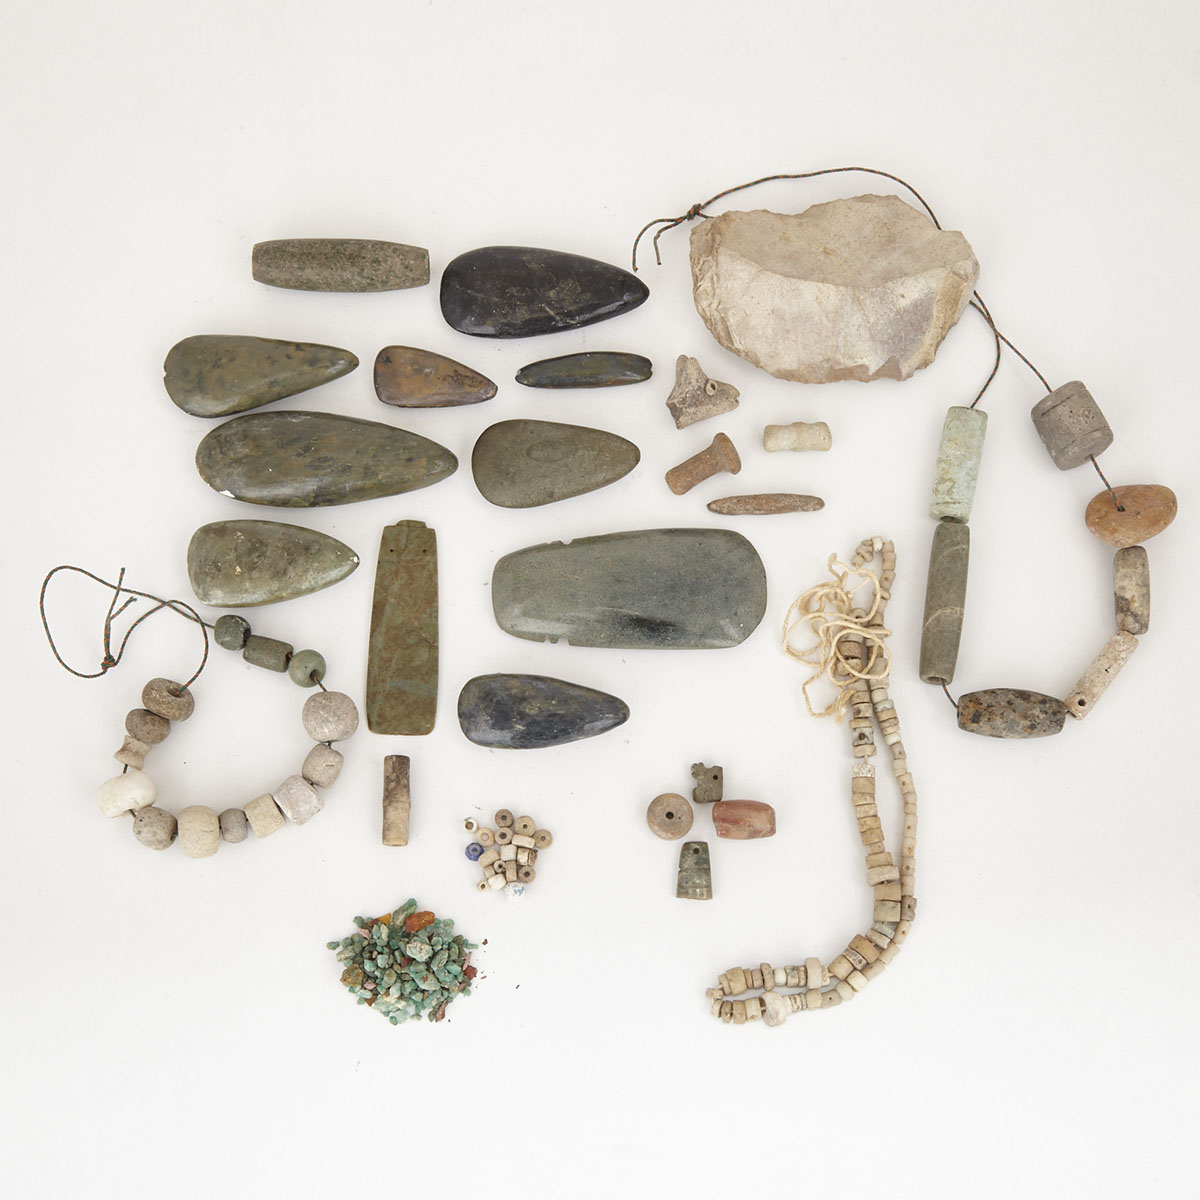 Group of Ceramic and Stone Celts, Celt Pendants and Beads 